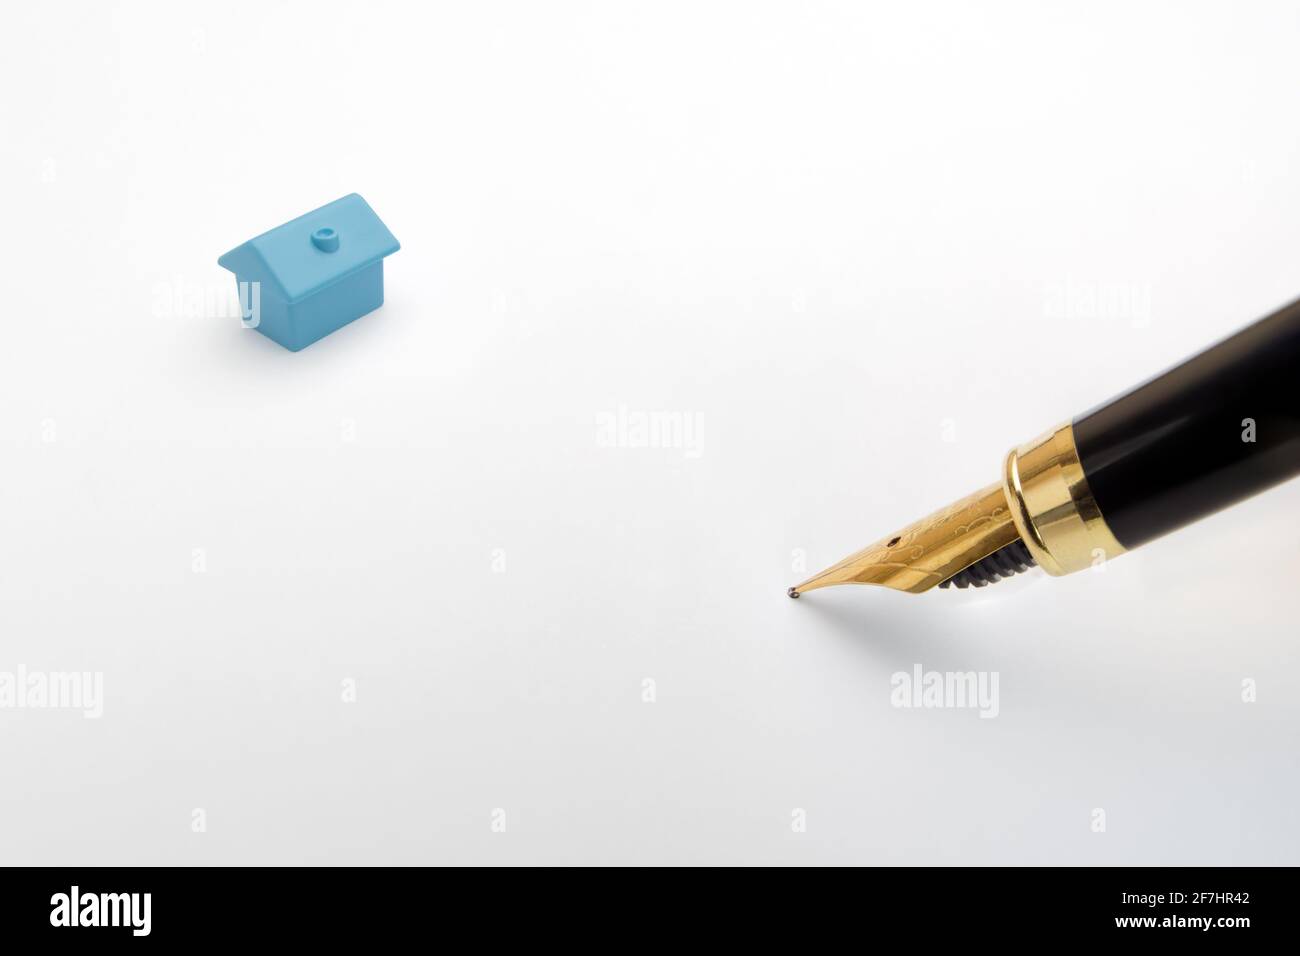 Empty template document signature pen house contract signing papers. Model home real estate property rent buy sale house loan signing pen document Stock Photo